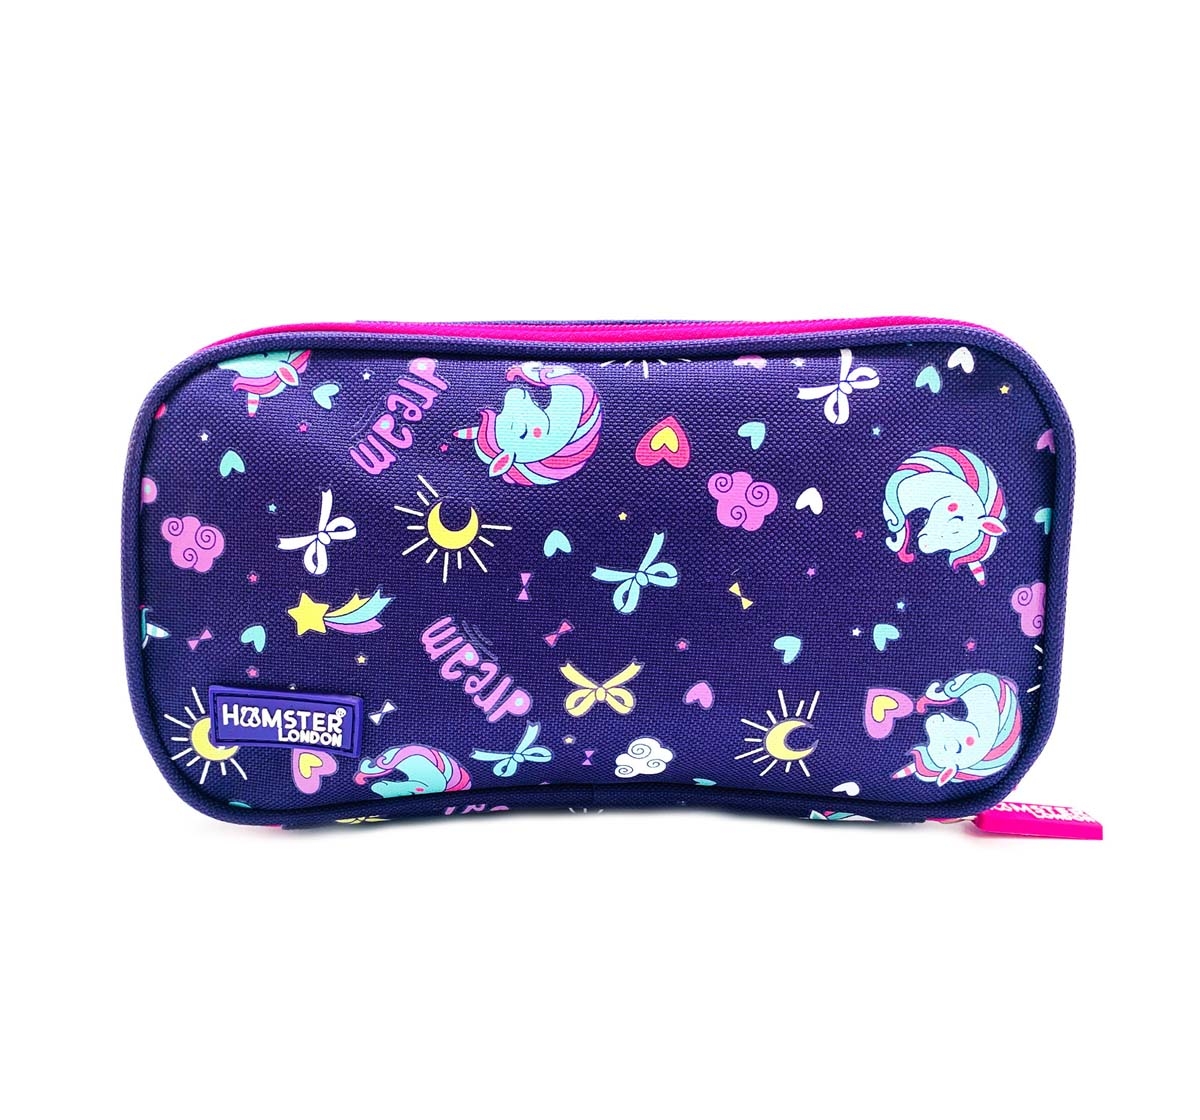 Hamster London | Hamster London Straight Fire Pencil Case Unicorn Bags for Girls Age 3Y+ (Purple)